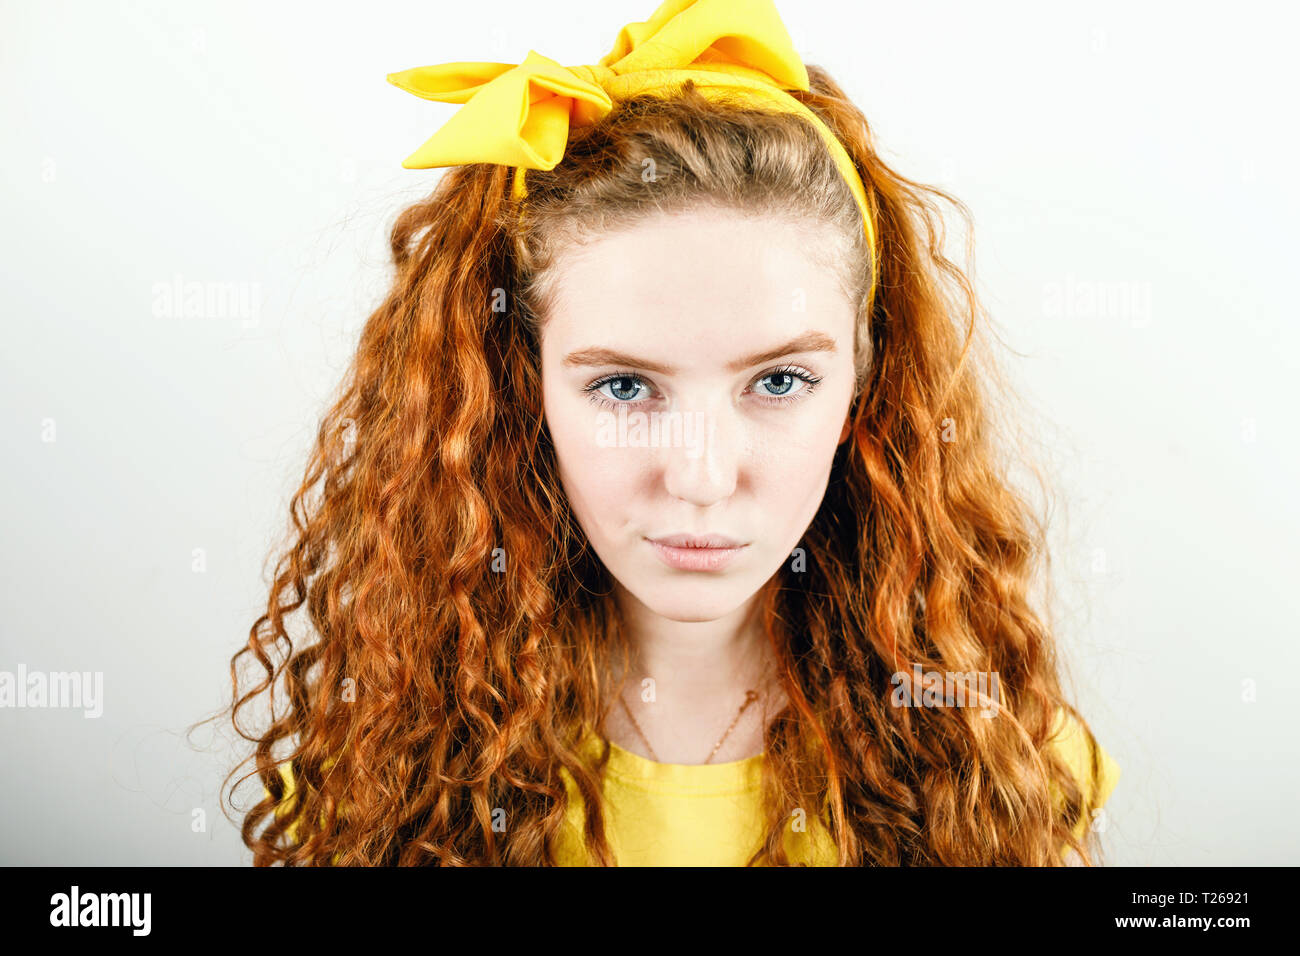 Portrait of curly redhead girl with a yellow bow on her head wearing yellow t-shirt on the white background Stock Photo